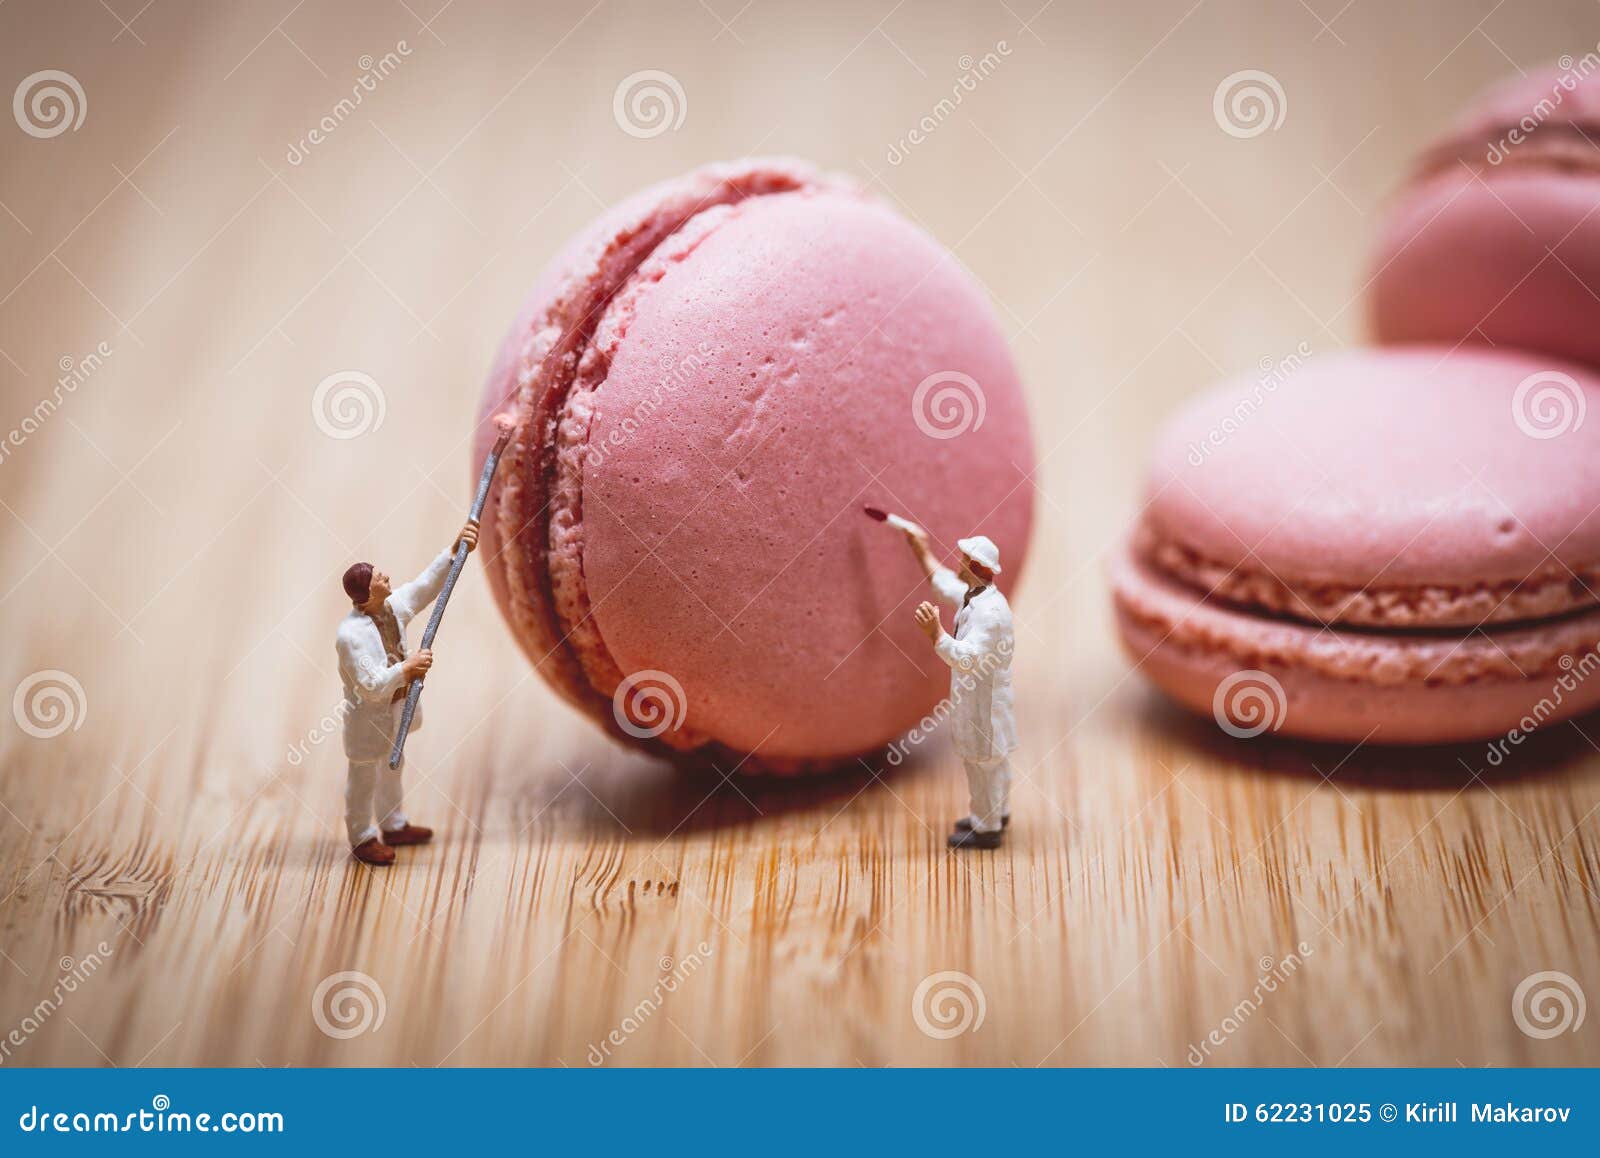 miniature painters coloring macaroon. color tone tuned.